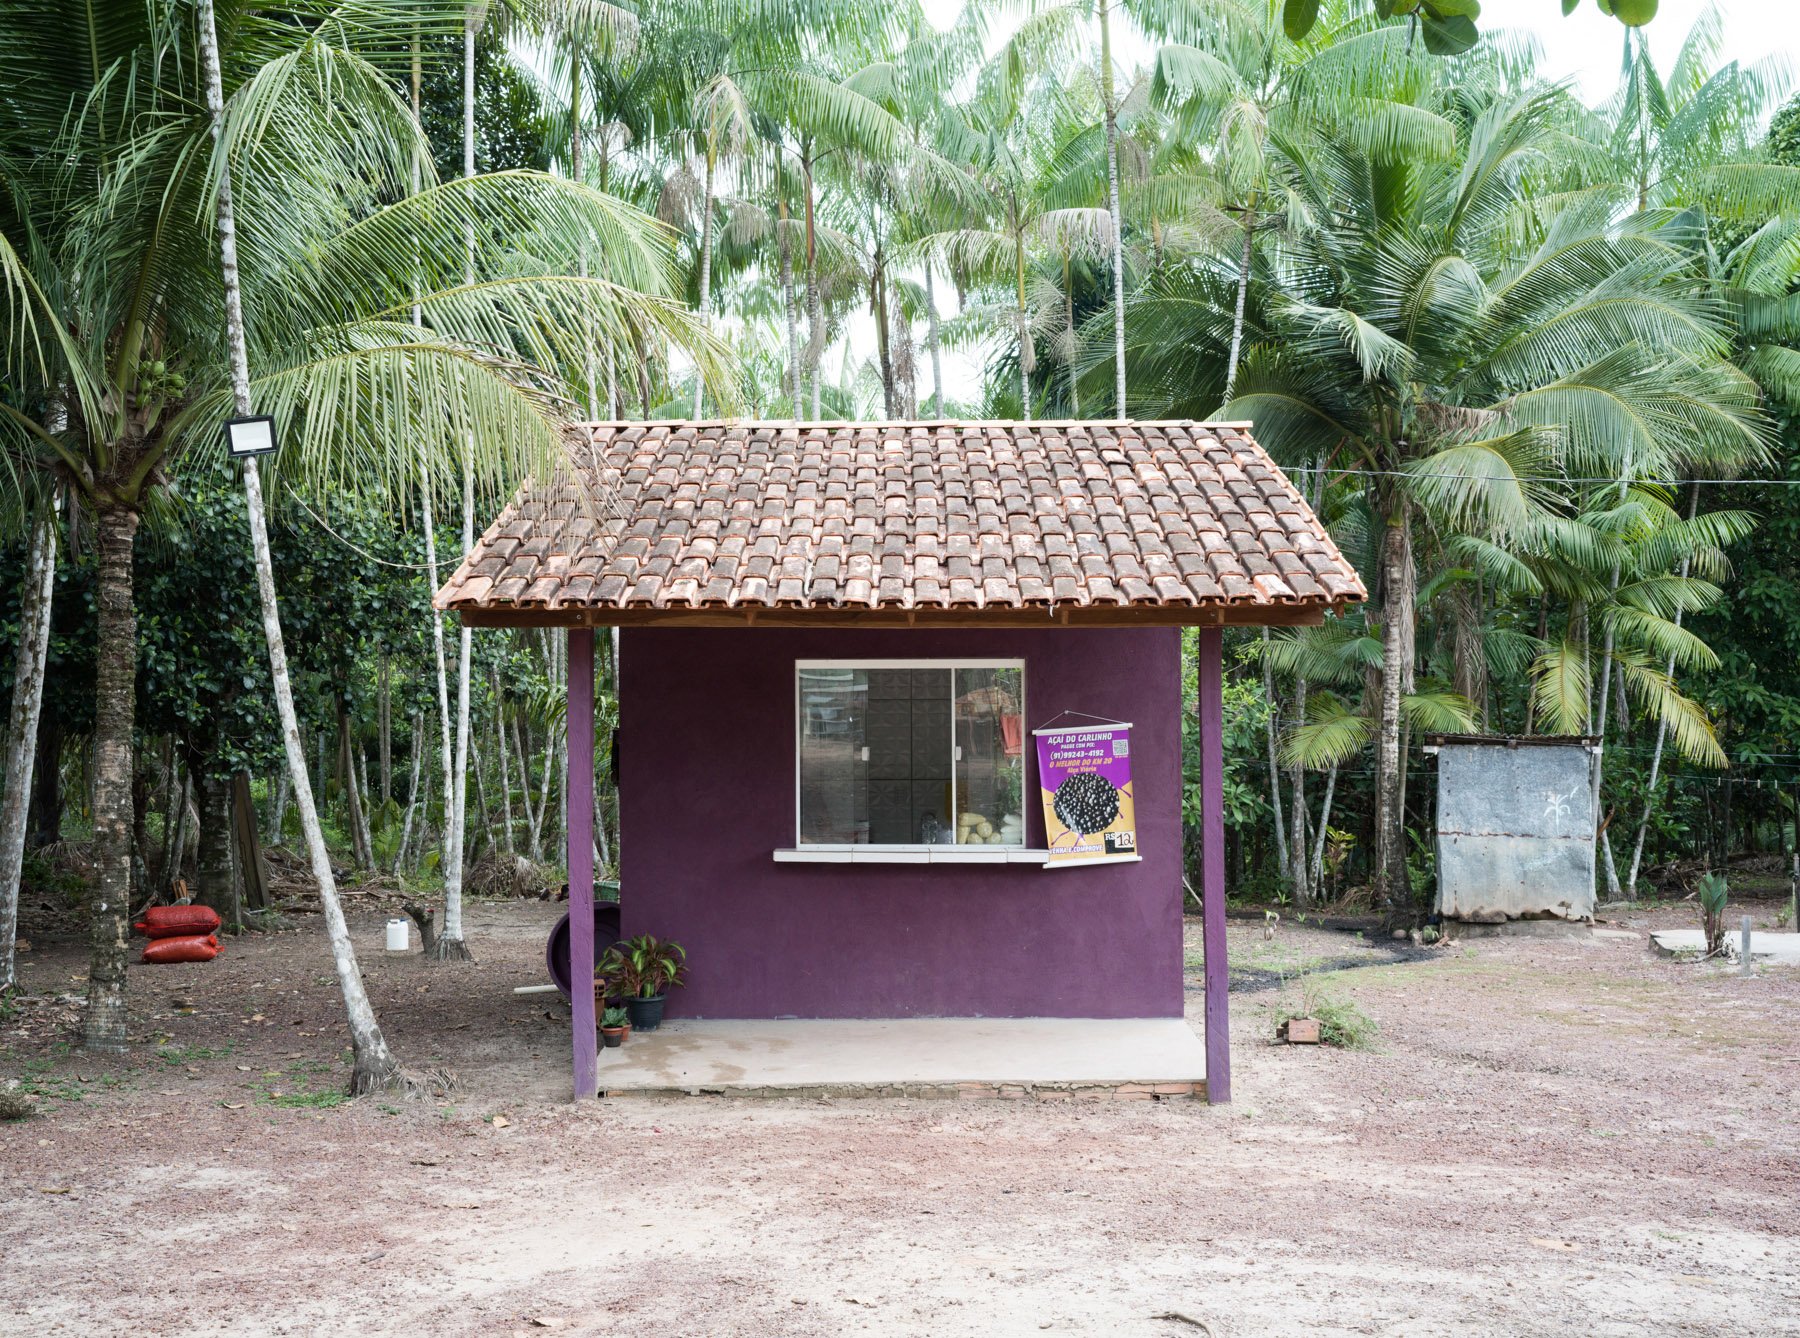  Boa Vista Da Acará, 2023. A view of a local açai shop. The local farmers have small açai cultivation that are their main income. The açai is sold and consumed locally. The honey production is a side income respect the main activities. The stingless 